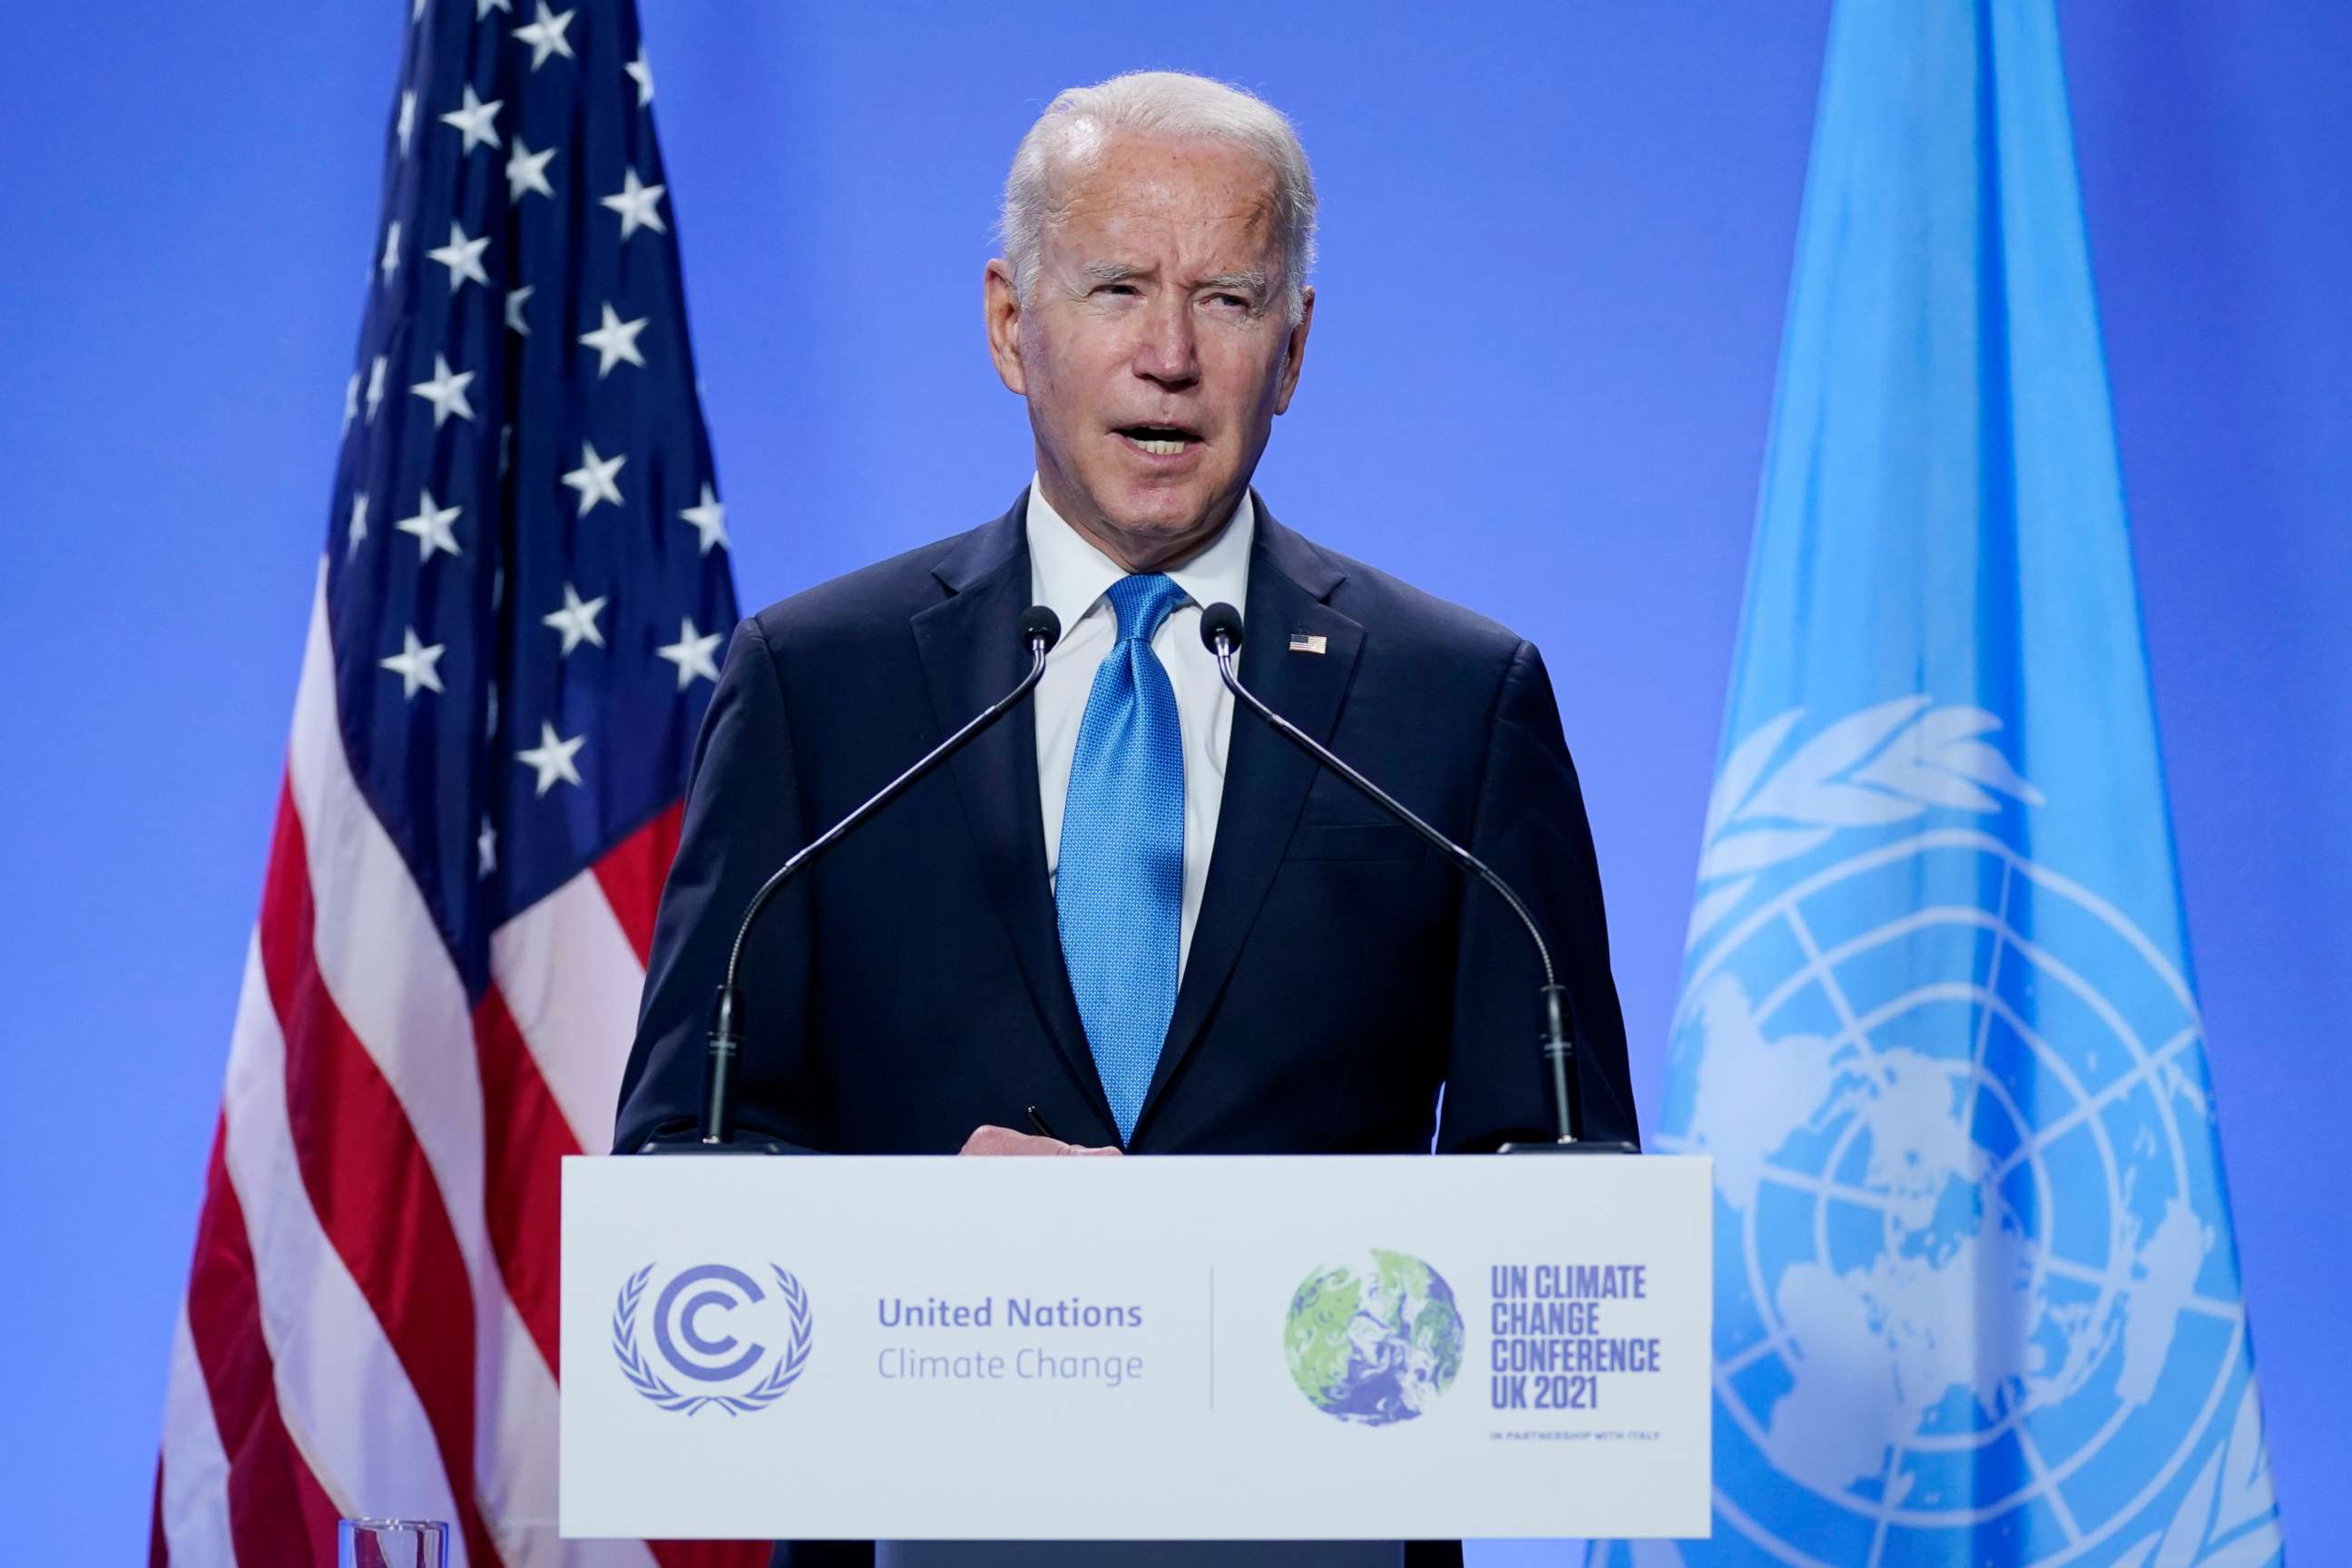 PHOTO: President Joe Biden listens to a question during a news conference at the COP26 U.N. Climate Summit, Nov. 2, 2021, in Glasgow, Scotland.